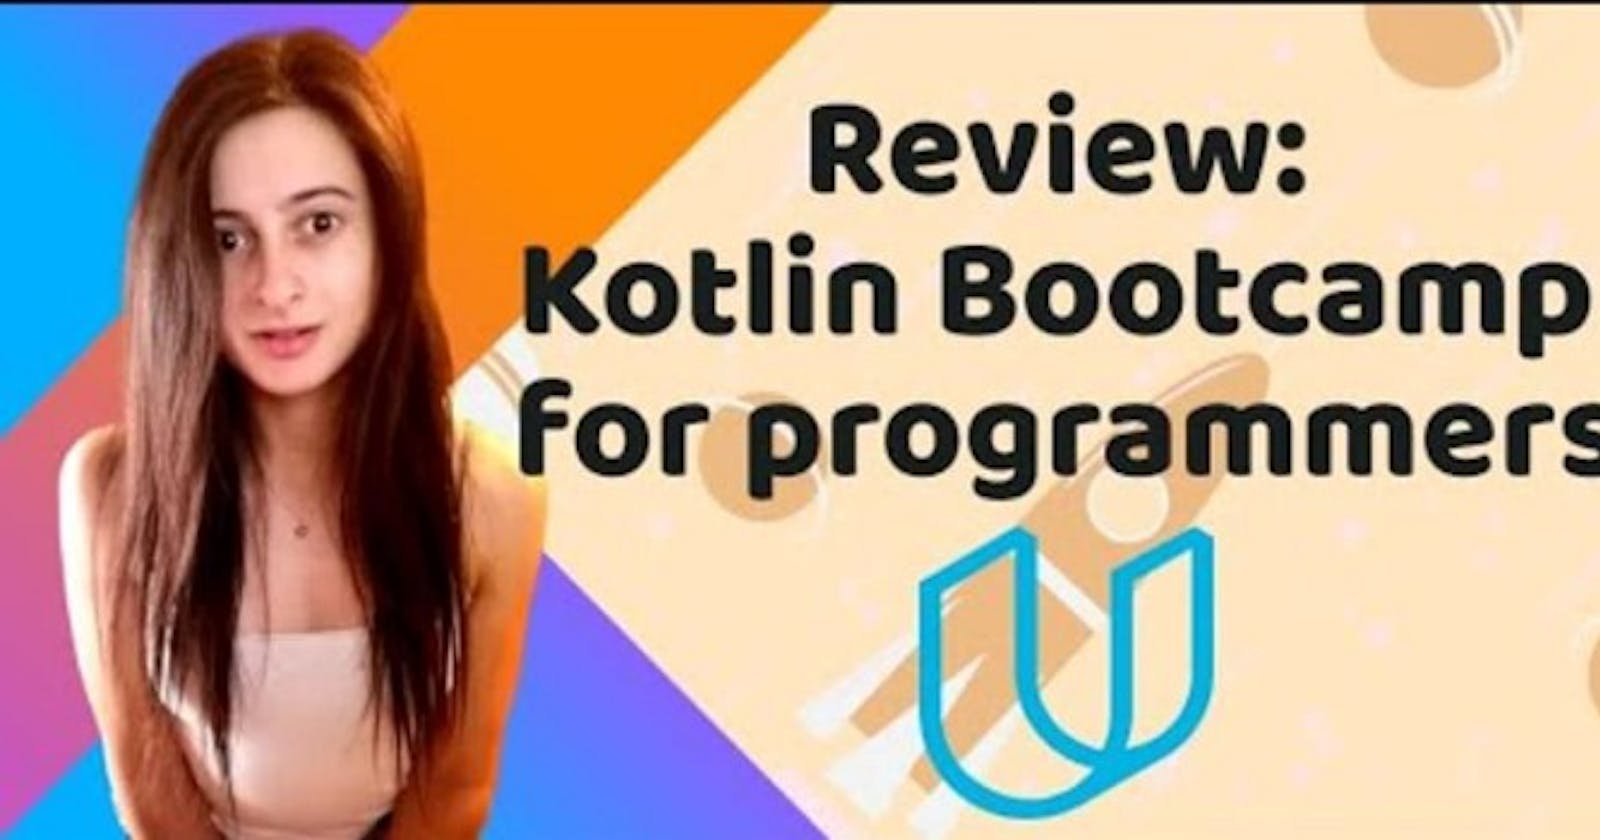 Review: Kotlin Bootcamp for programmers by Google [2020] Udacity